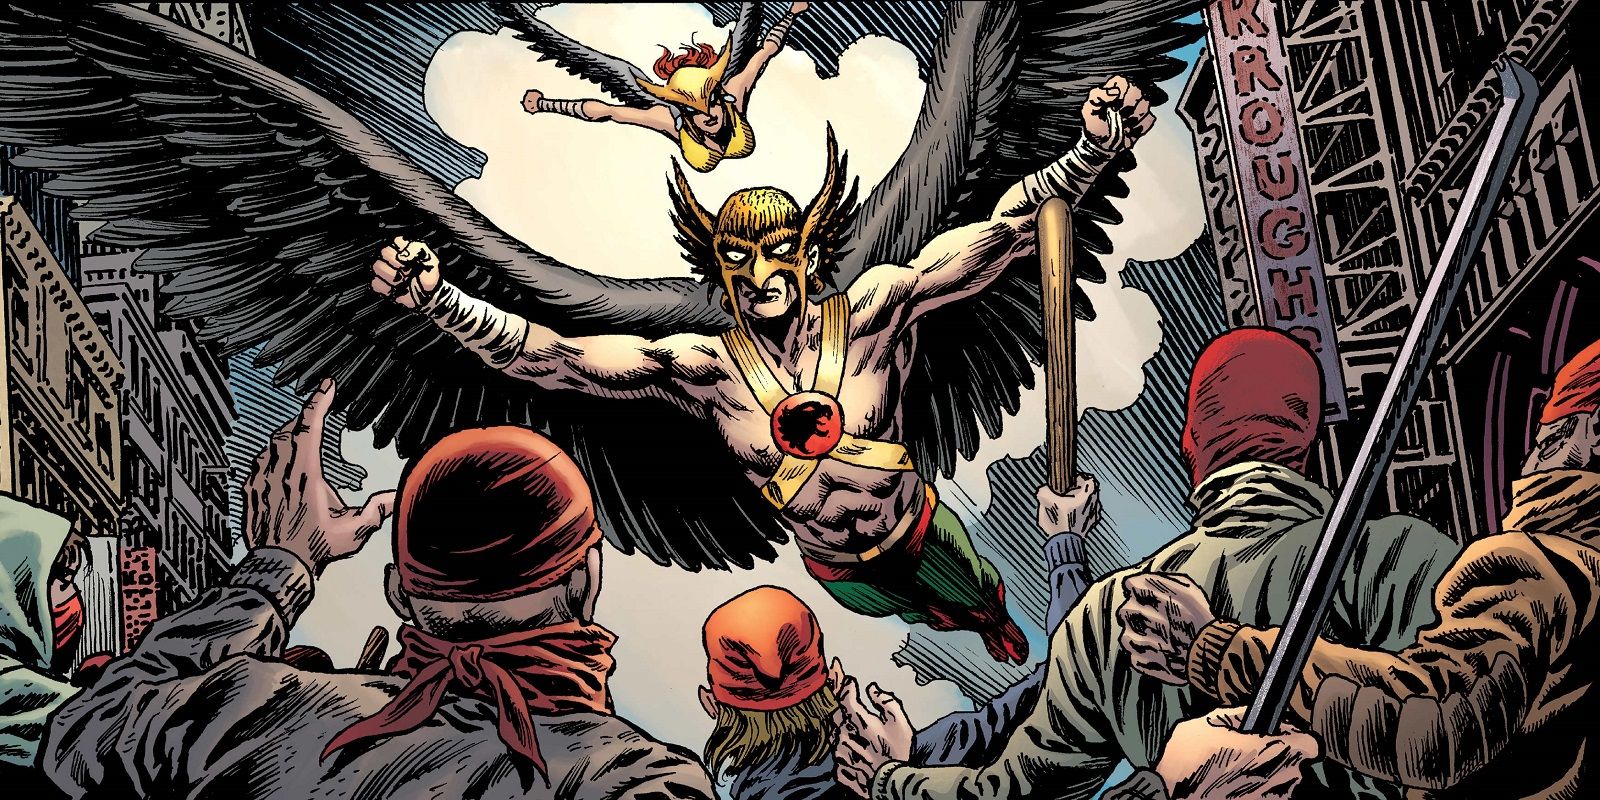 Hawkman and Hawkgirl flying over a city